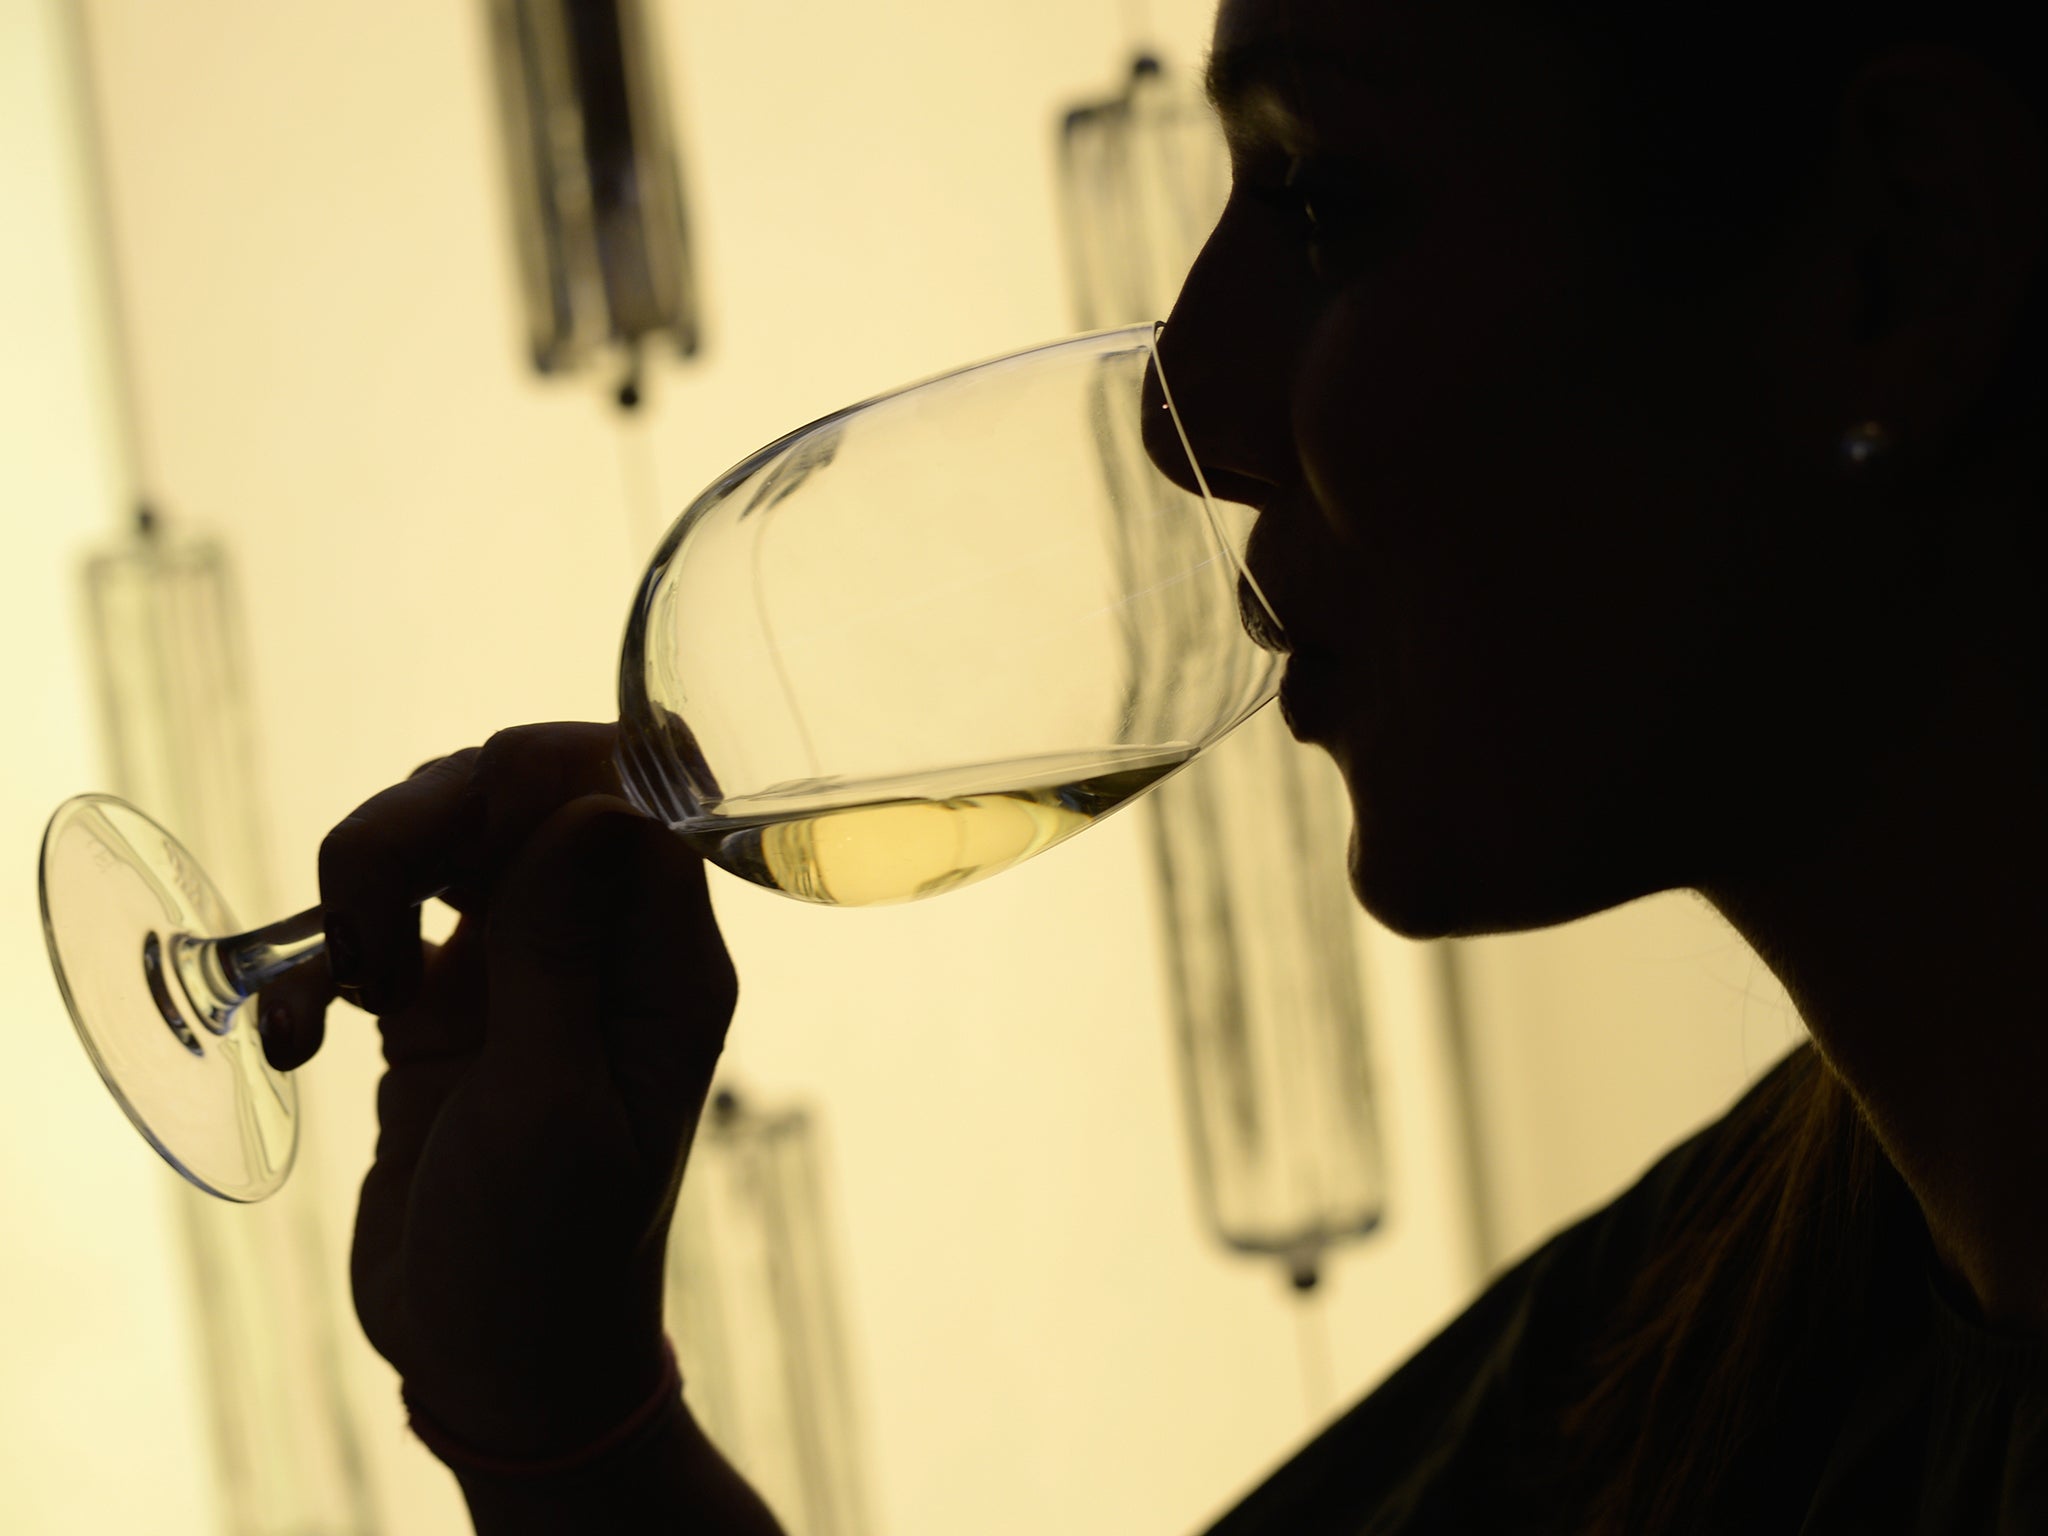 The report said 3.3 million women could be 'unknowingly exposing' their babies to alcohol